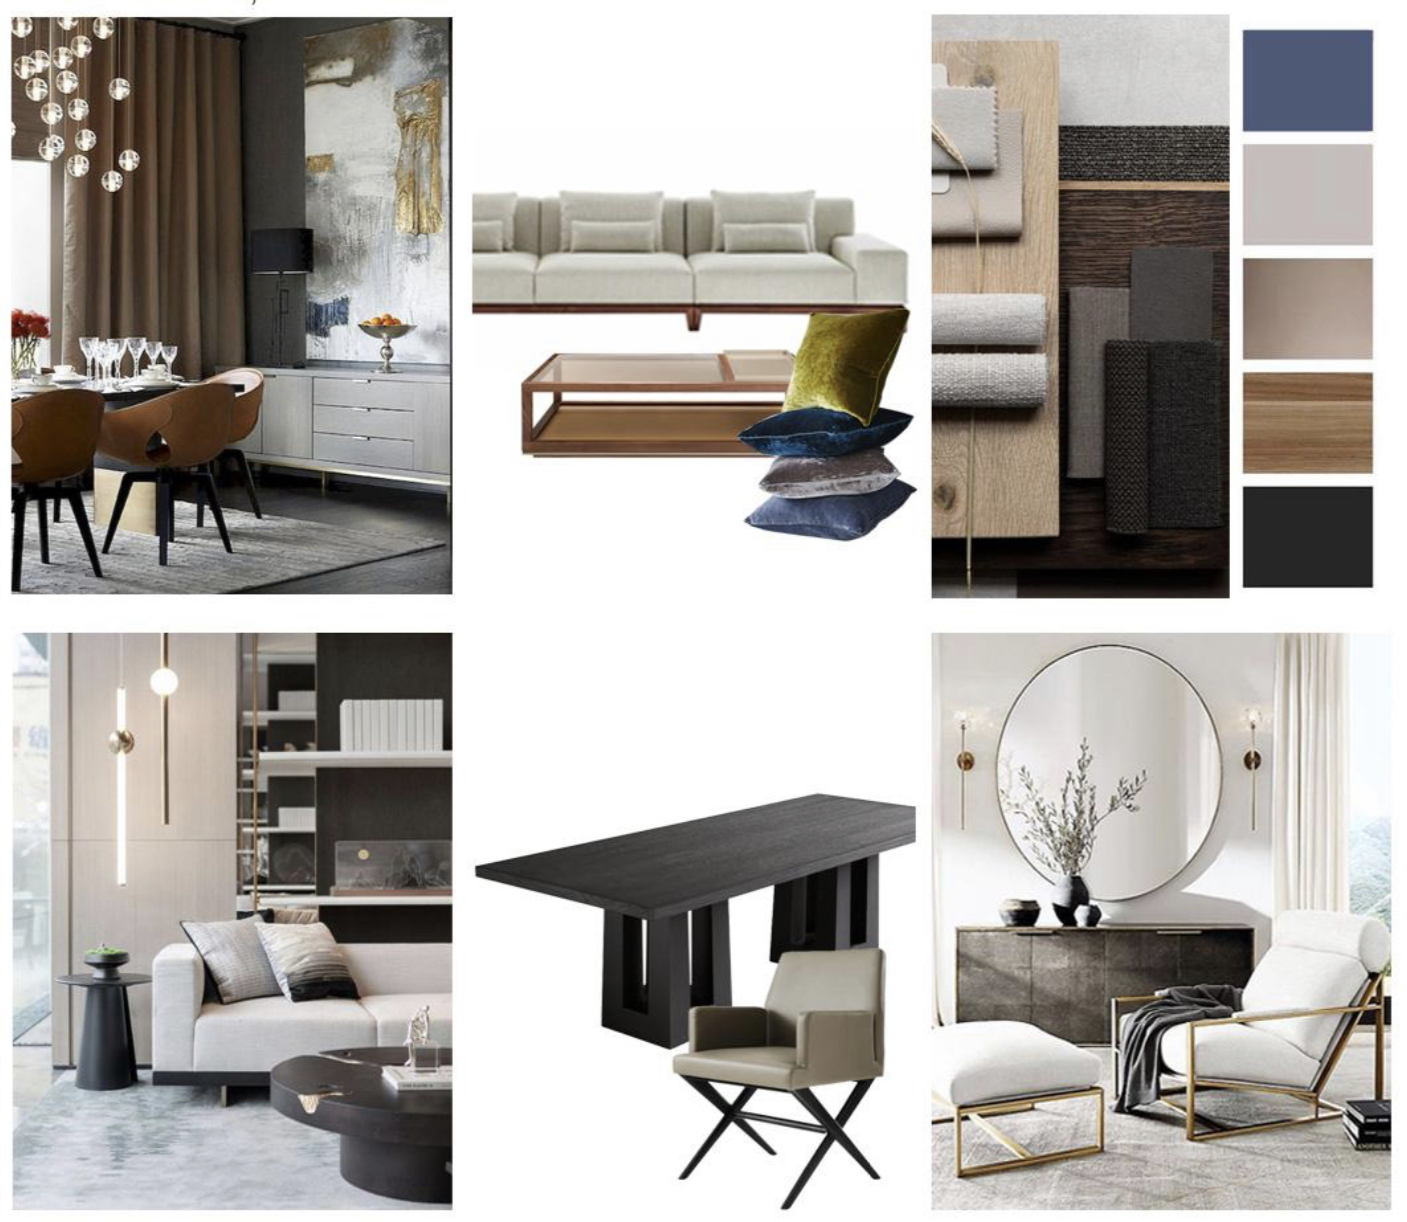 Space Planning and Mood Boards - The Home Stylist